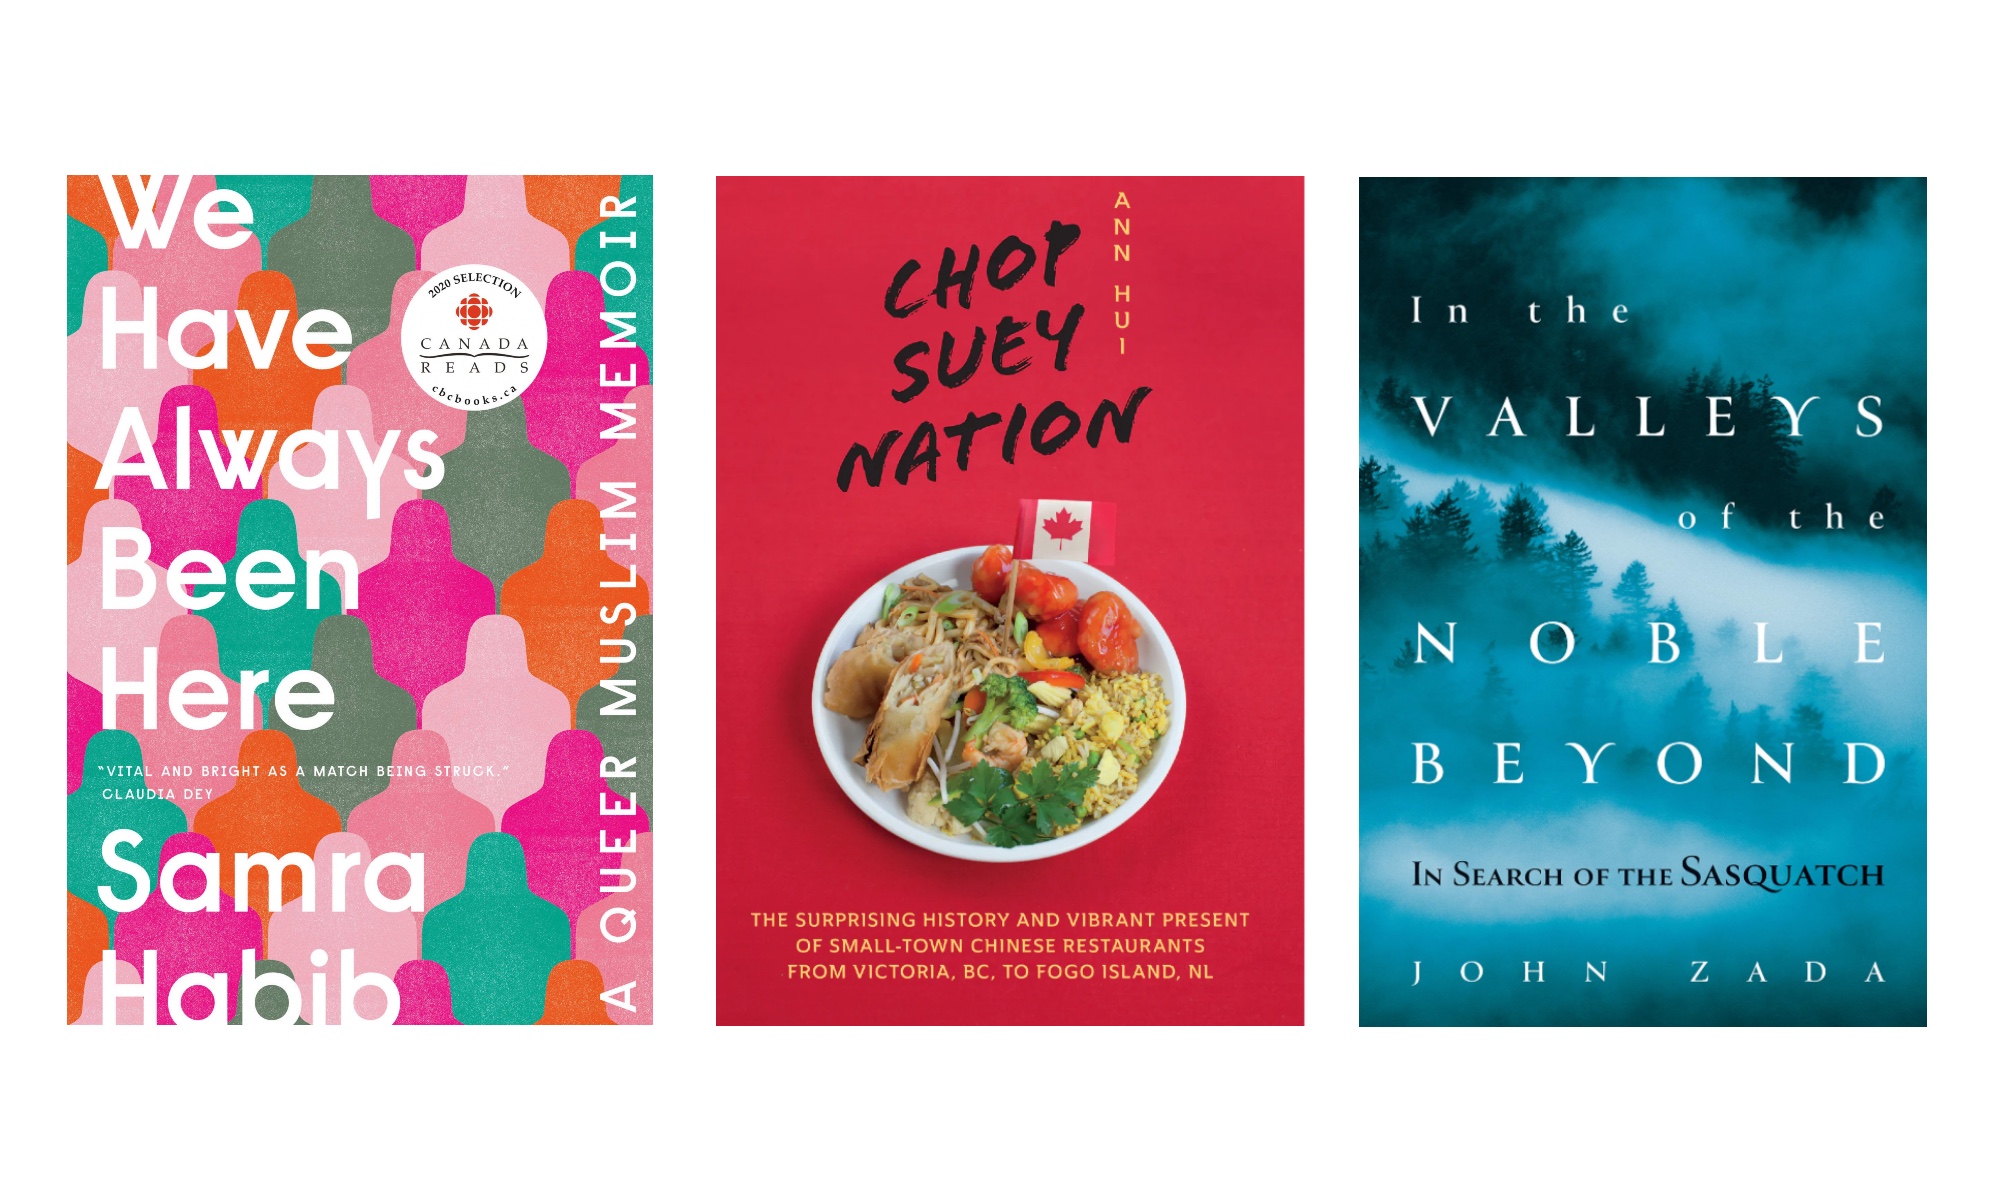 Book covers of We Have Always Been Here, Chop Suey Nation, and In the Valleys of the Noble Beyond